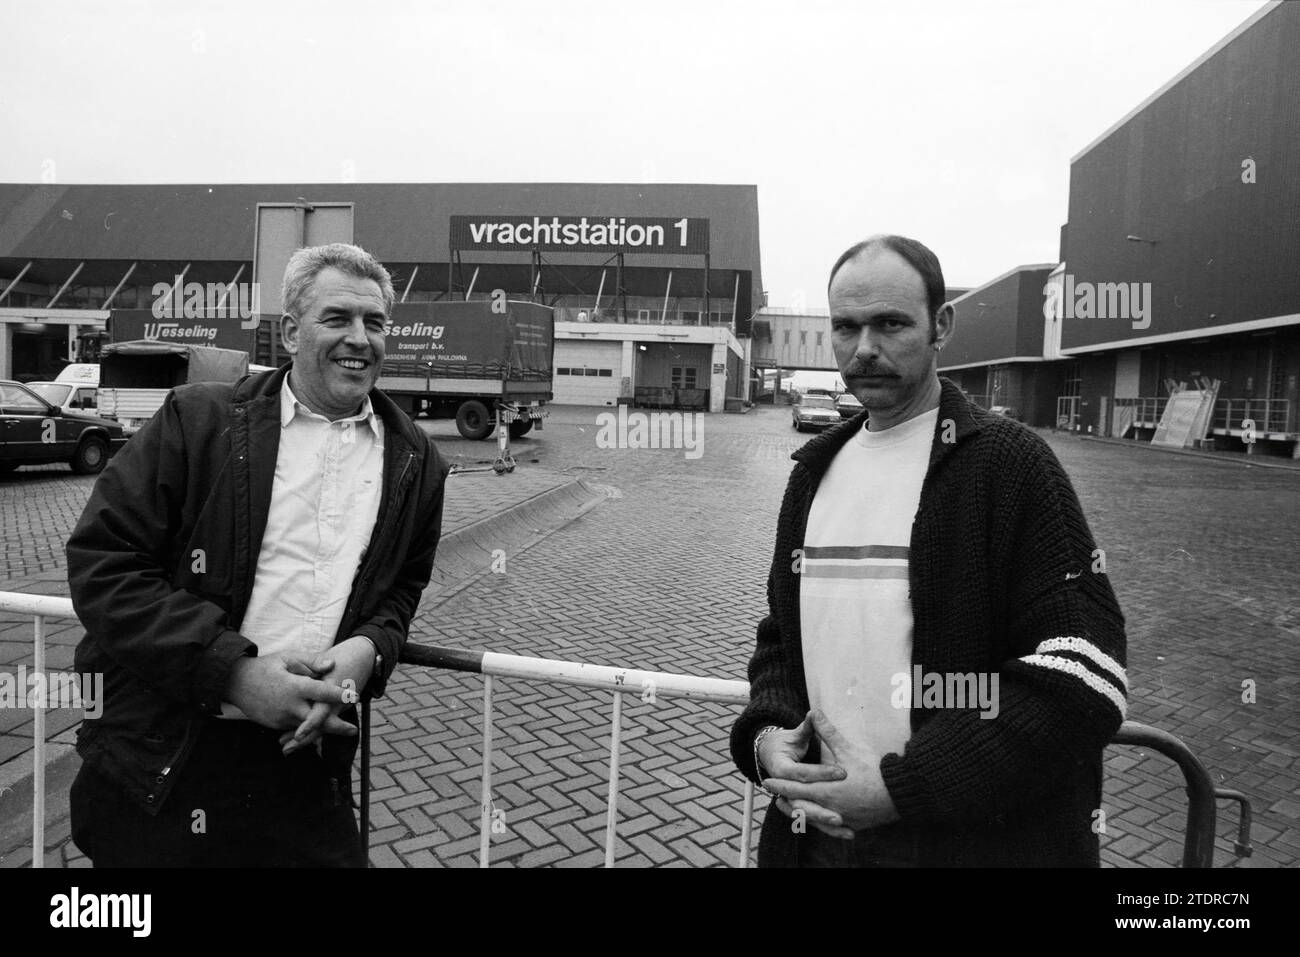 2 drivers Mr Broek and Verveld at Schiphol due to transport to Armenia, Transport, transport companies, Schiphol, 21-12-1988, Whizgle News from the Past, Tailored for the Future. Explore historical narratives, Dutch The Netherlands agency image with a modern perspective, bridging the gap between yesterday's events and tomorrow's insights. A timeless journey shaping the stories that shape our future Stock Photo